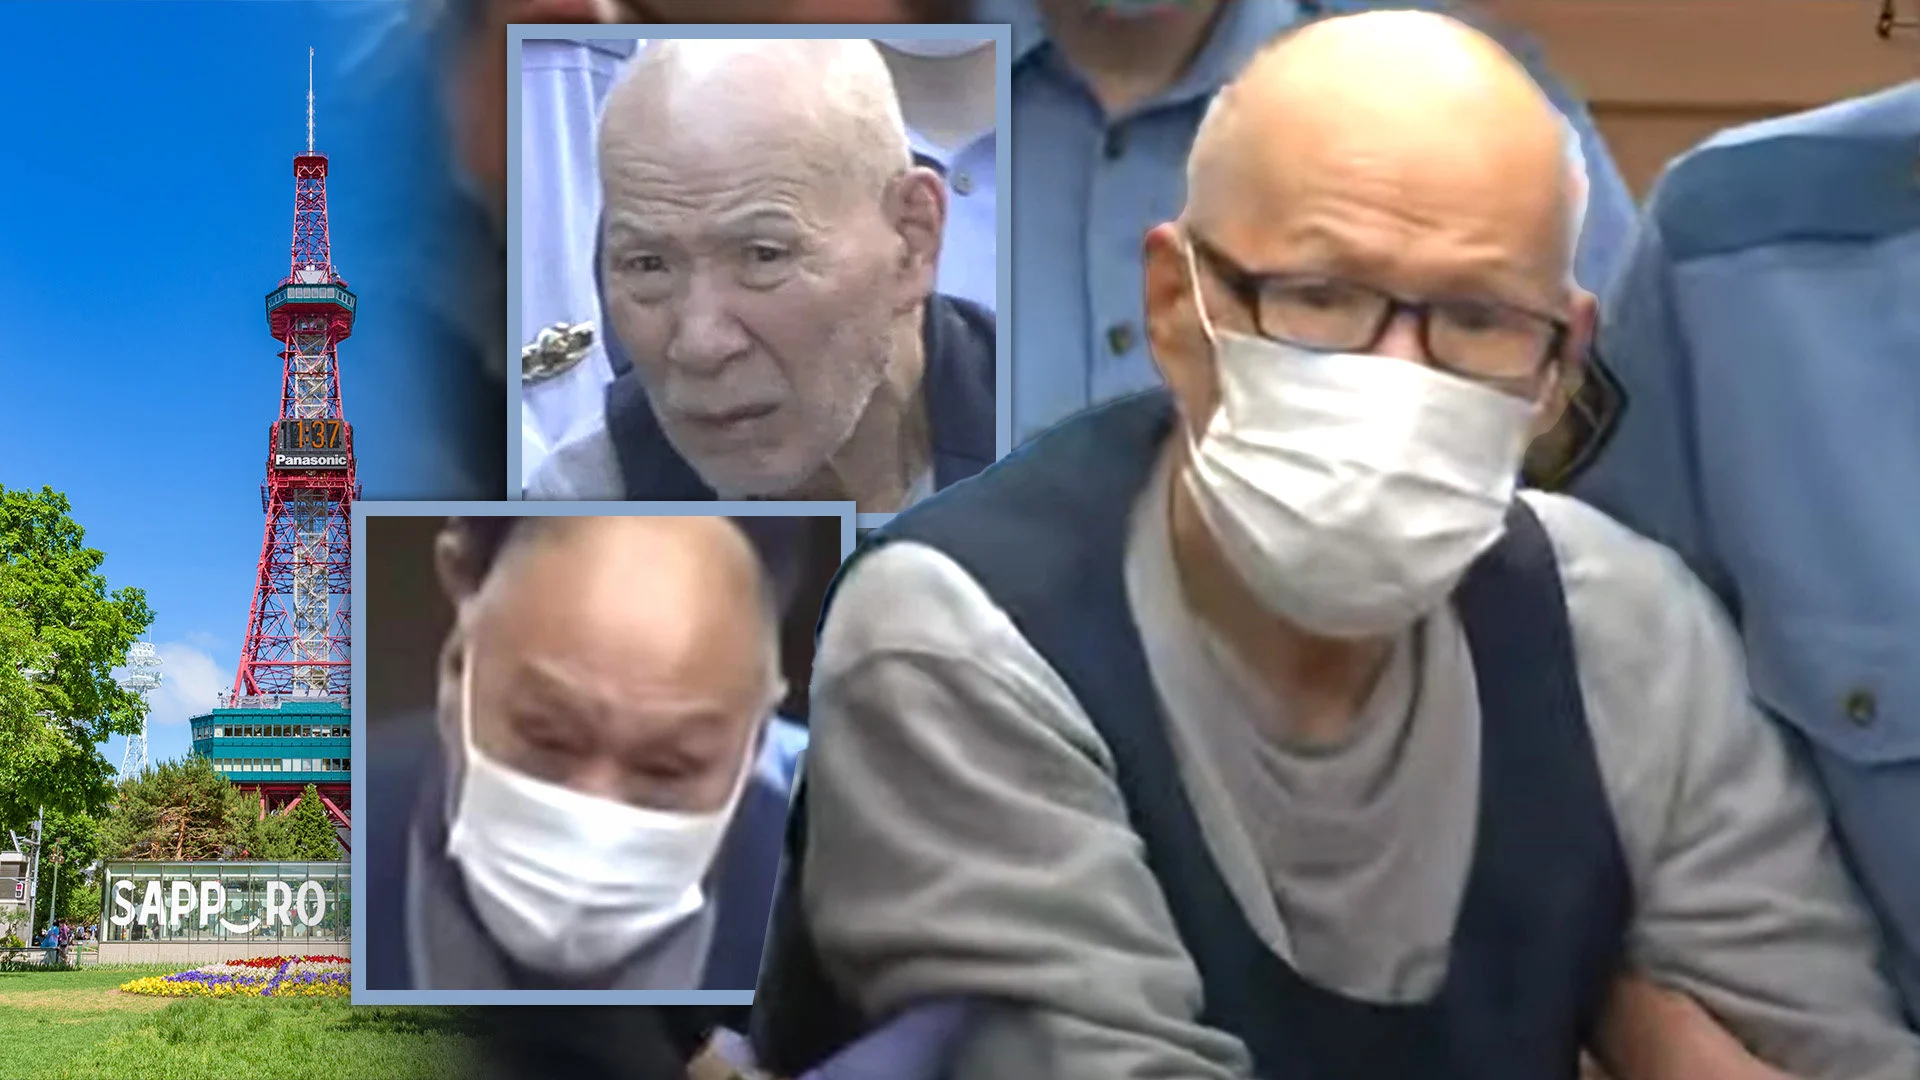 ‘The Grandpa Gang’: Three Old Men With a Combined Age of 227 Become Japan’s New Actual ‘Partners in Crime’